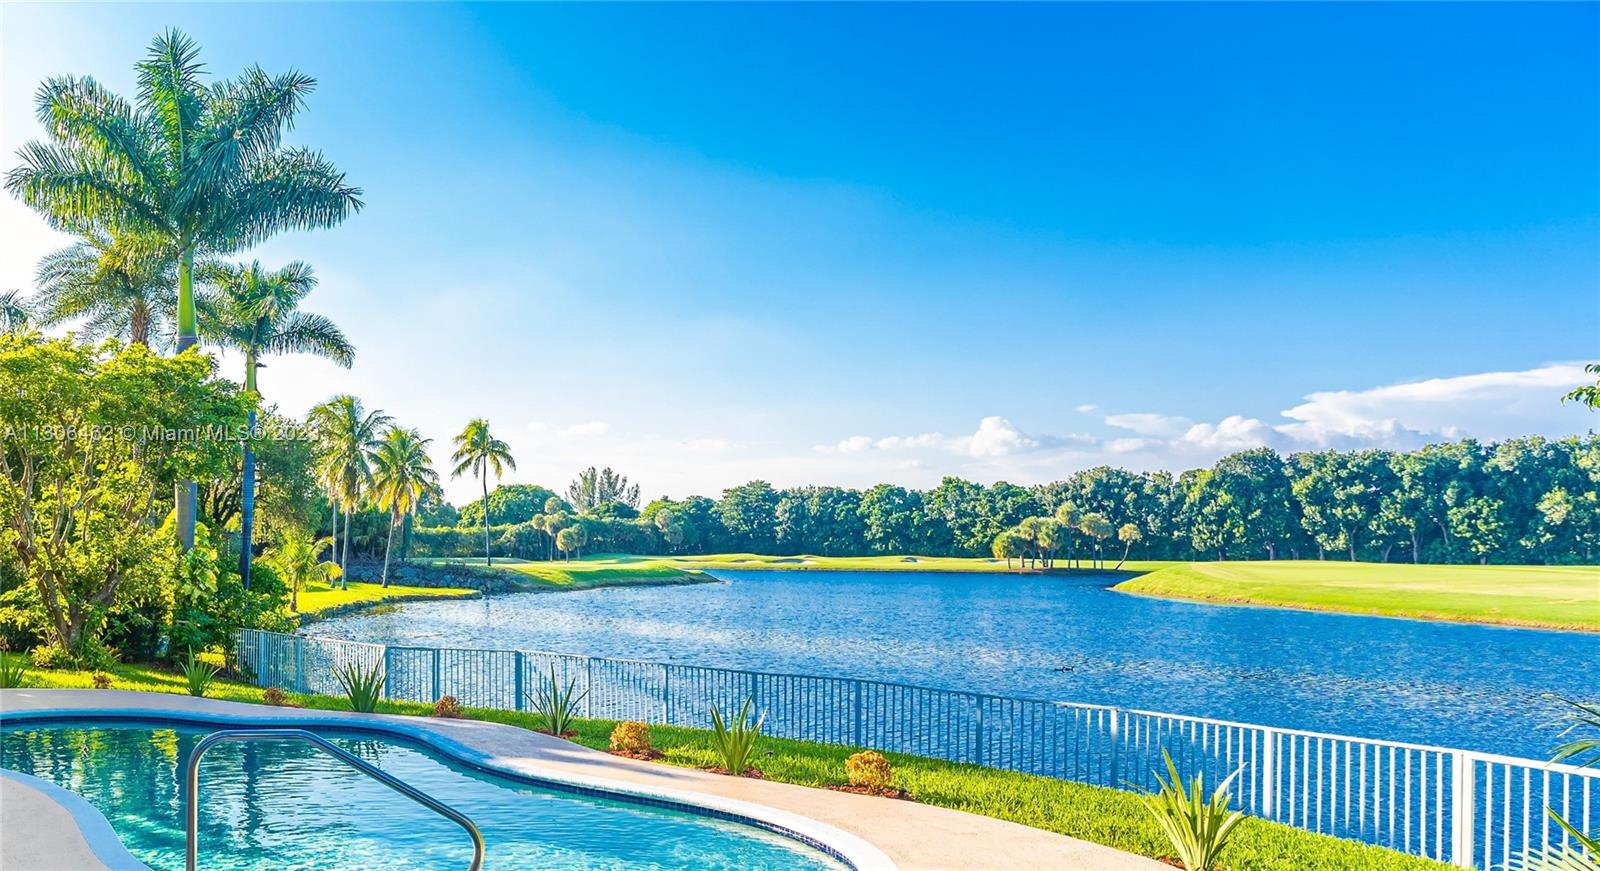 Recently renovated tropical paradise, with a one of a kind view!!! Breathtaking unobstructed golf and lake view, which only a few can enjoy and call it home.  Situated in the prestigious Doral Estates, and the world renown Trump National Doral Golf Club. This is a Golfer’s dream property, with quick access to the Blue Monster, the Spa, and all of its amenities. Resort style living at its finest!. Large open kitchen with eat in dining. Oversized living rooms. Huge master bedroom & bath. 3 car garage plus golf cart.  Tons of luxurious elements are seen throughout for all your living and entertaining needs. Marble flooring downstairs, Exotic Brazilian hardwood upstairs, granite counters, soffits, recessed ceilings, among the many personalized accents.  Don’t miss out on this amazing property!